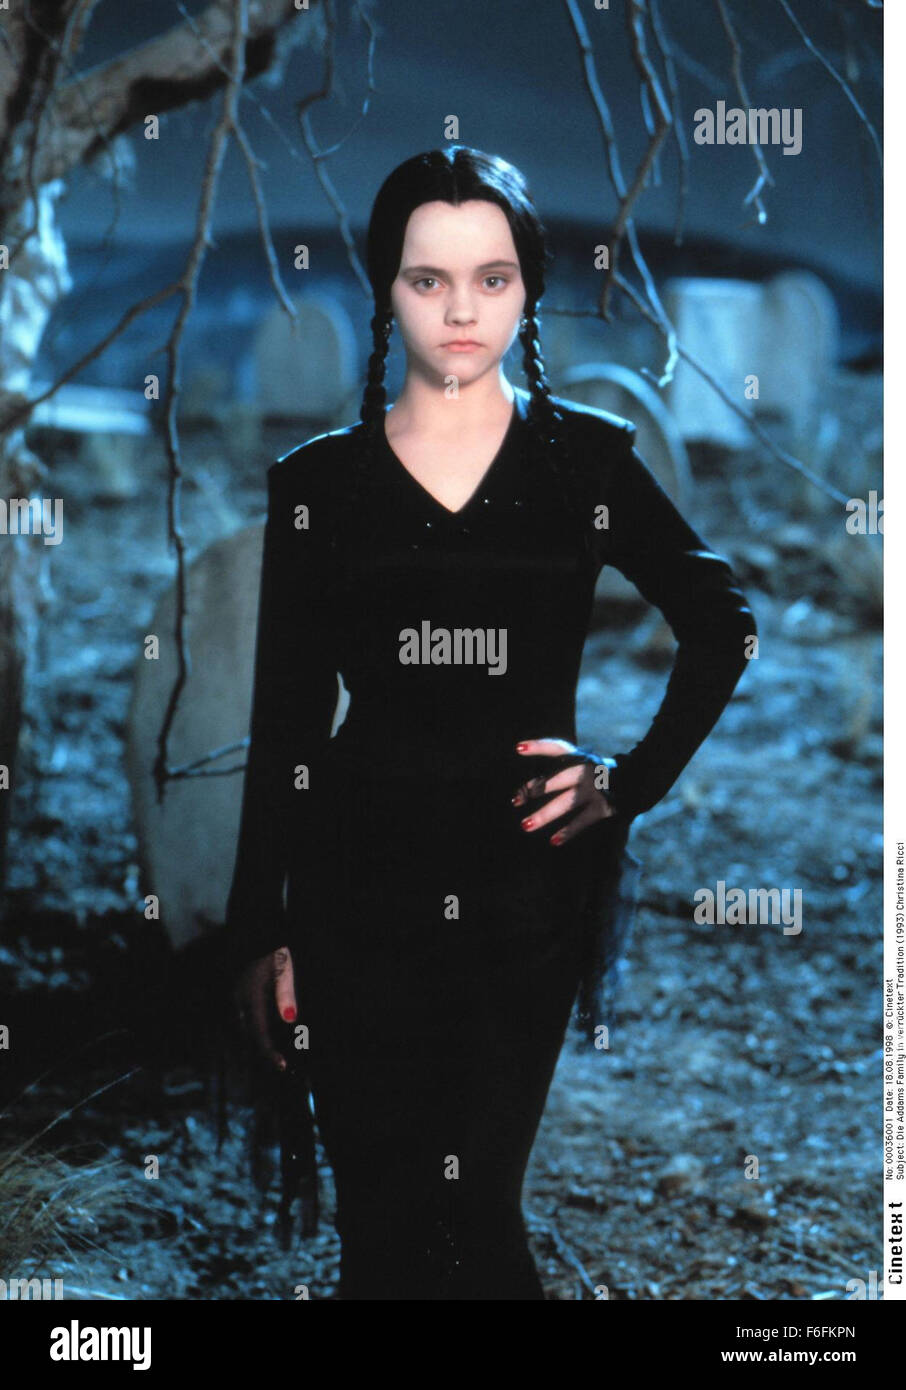 RELEASE DATE: 22 November 1991. MOVIE TITLE: The Addams Family - STUDIO: Paramount Pictures. PLOT: Con artists plan to fleece the eccentric family using an accomplice who claims to be their long lost Uncle Fester. PICTURED: CHRISTINA RICCI as Wednesday Addams. Stock Photo